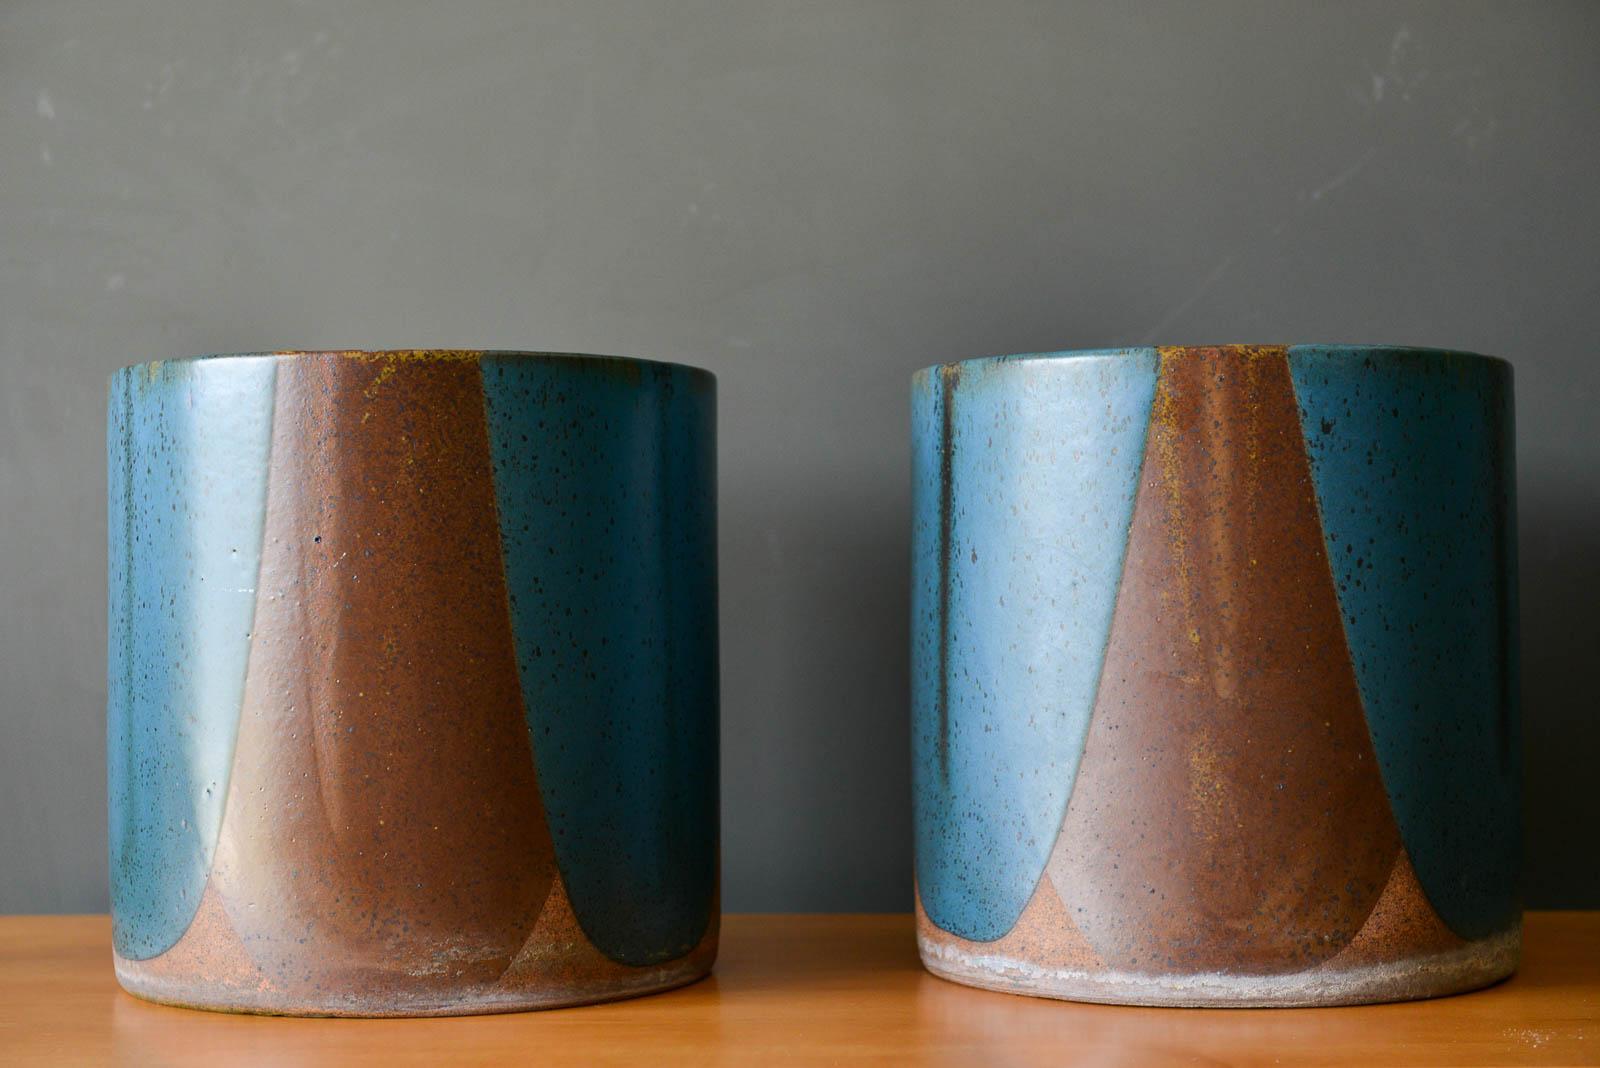 Pair of David Cressey for Architectural Pottery Pro/Artisan blue flame glaze planters, ca. 1970. Highly desirable blue/brown/ochre speckle interior planters in Cressey's signature poured flame glaze technique. Both are in excellent original